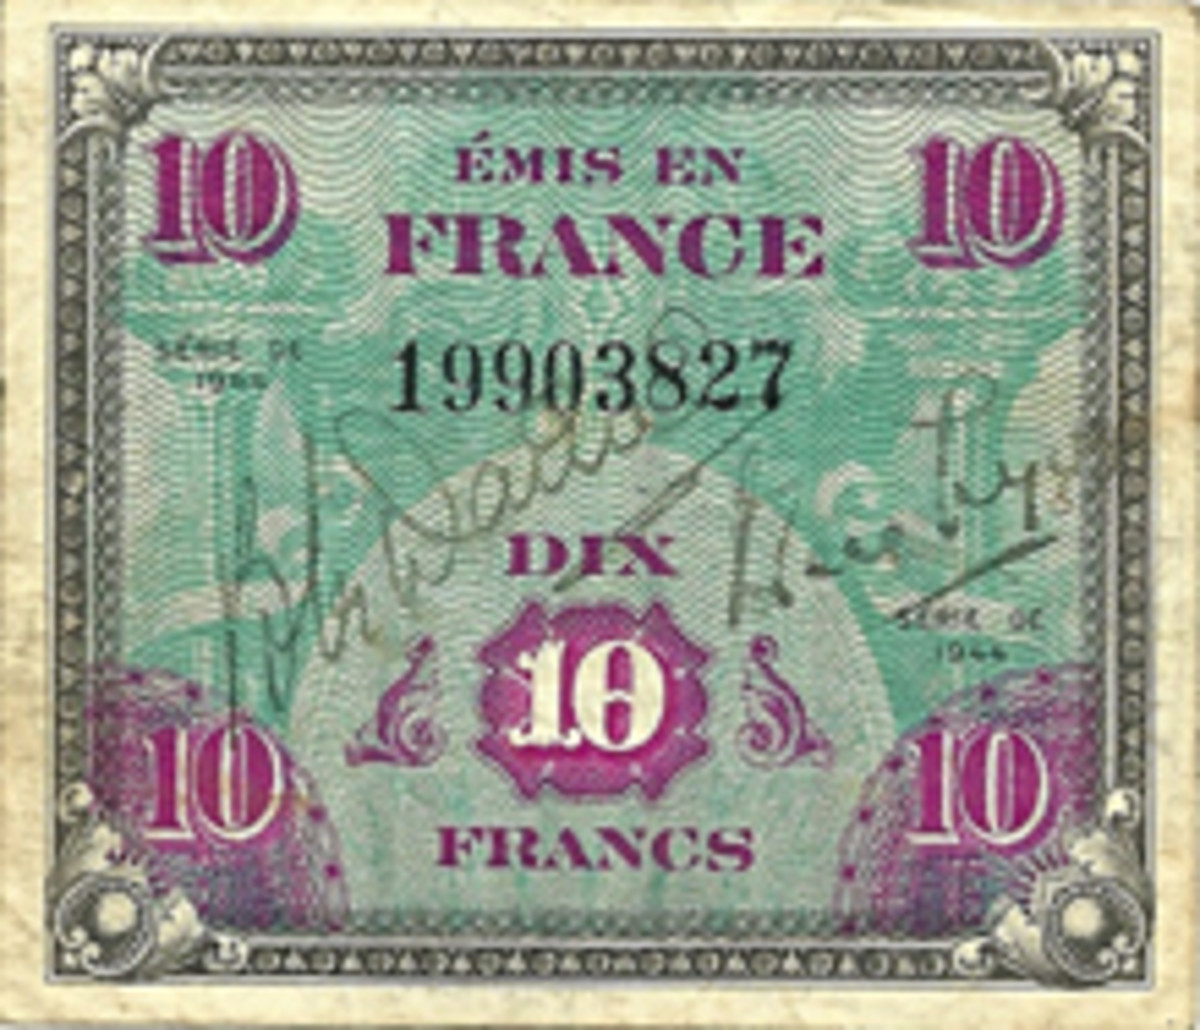  Here is the face of the Allied Military Currency 10-franc note with two unknown signatures.